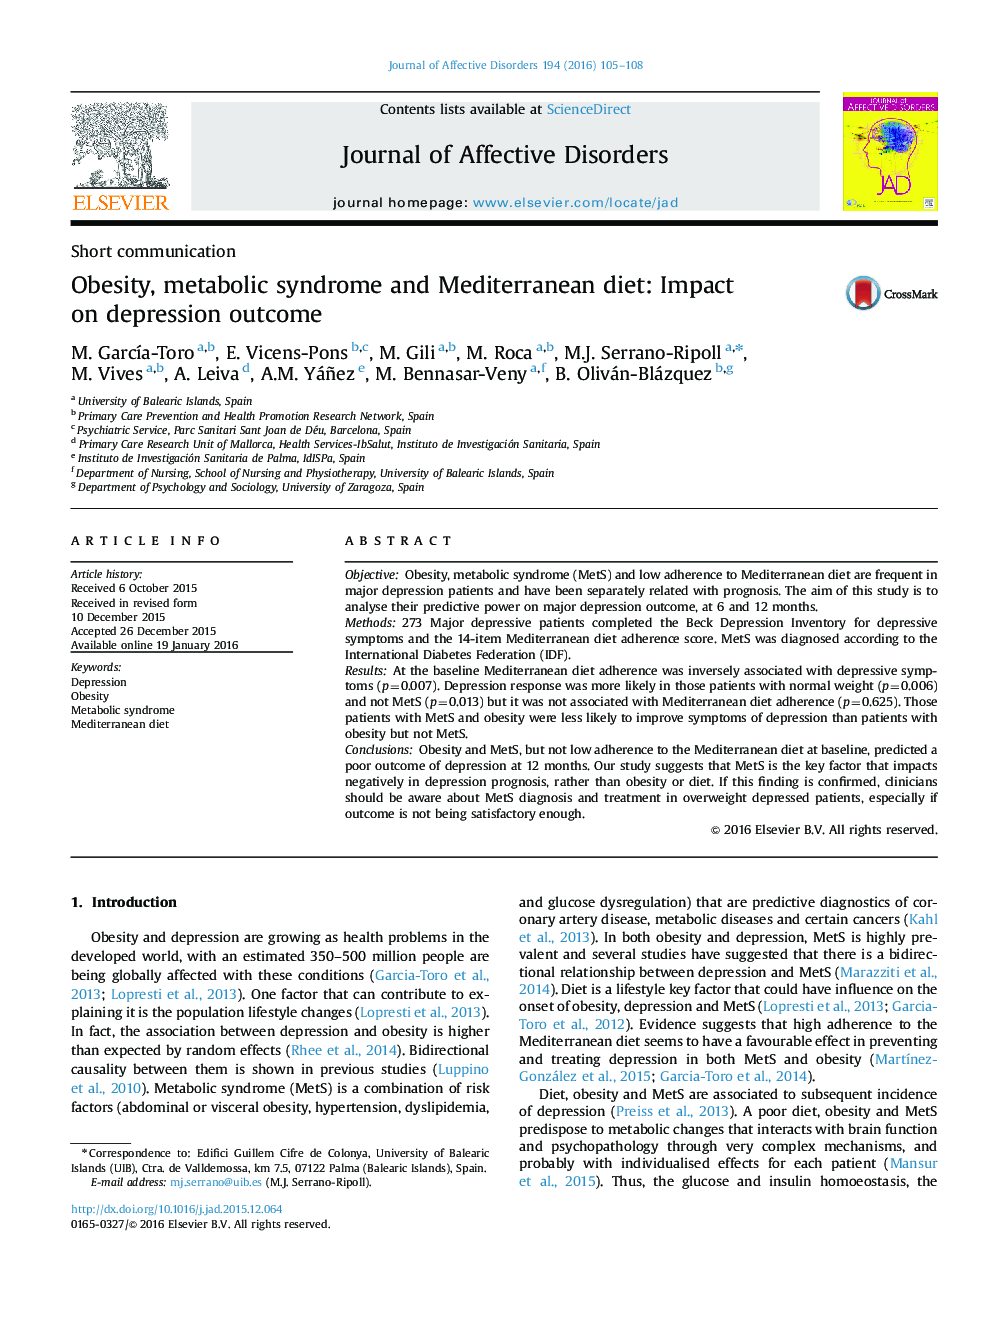 Obesity, metabolic syndrome and Mediterranean diet: Impact on depression outcome